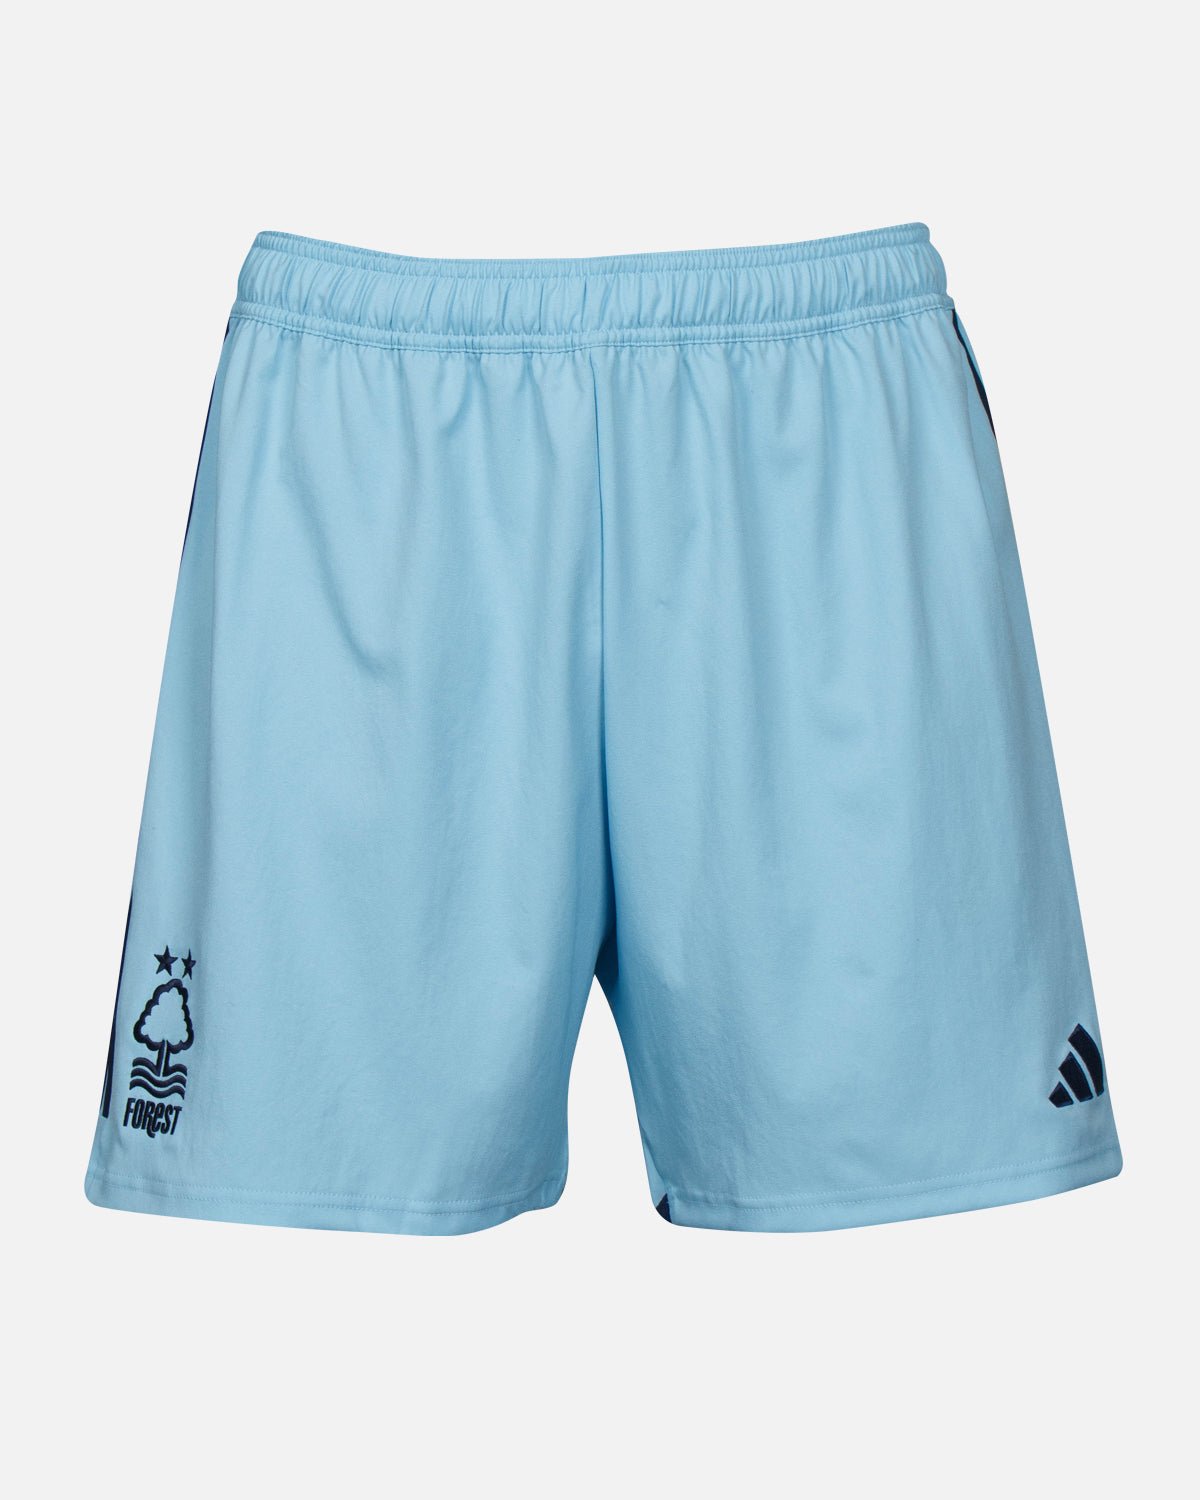 NFFC Away Shorts 23-24 - Nottingham Forest FC